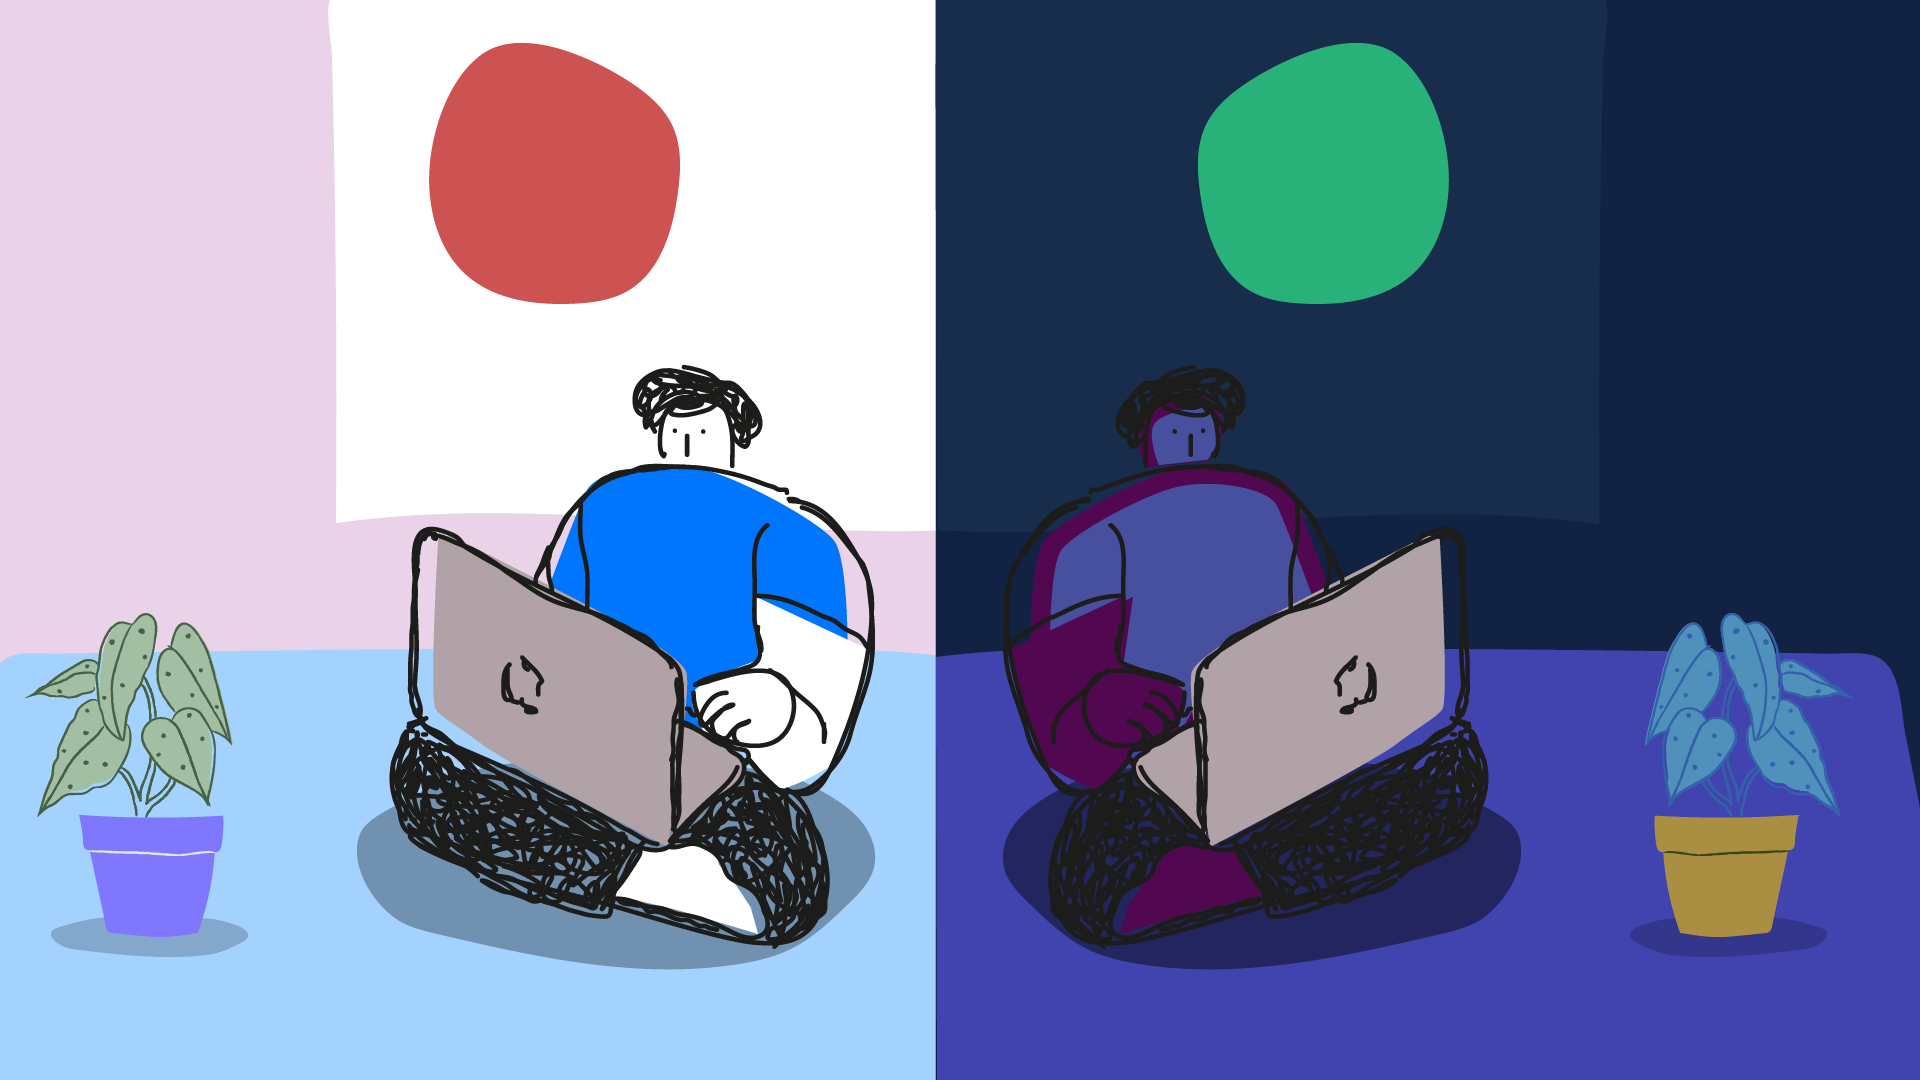 A person sitting with a laptop in the daylight is mirrored by the same setting but in the nighttime